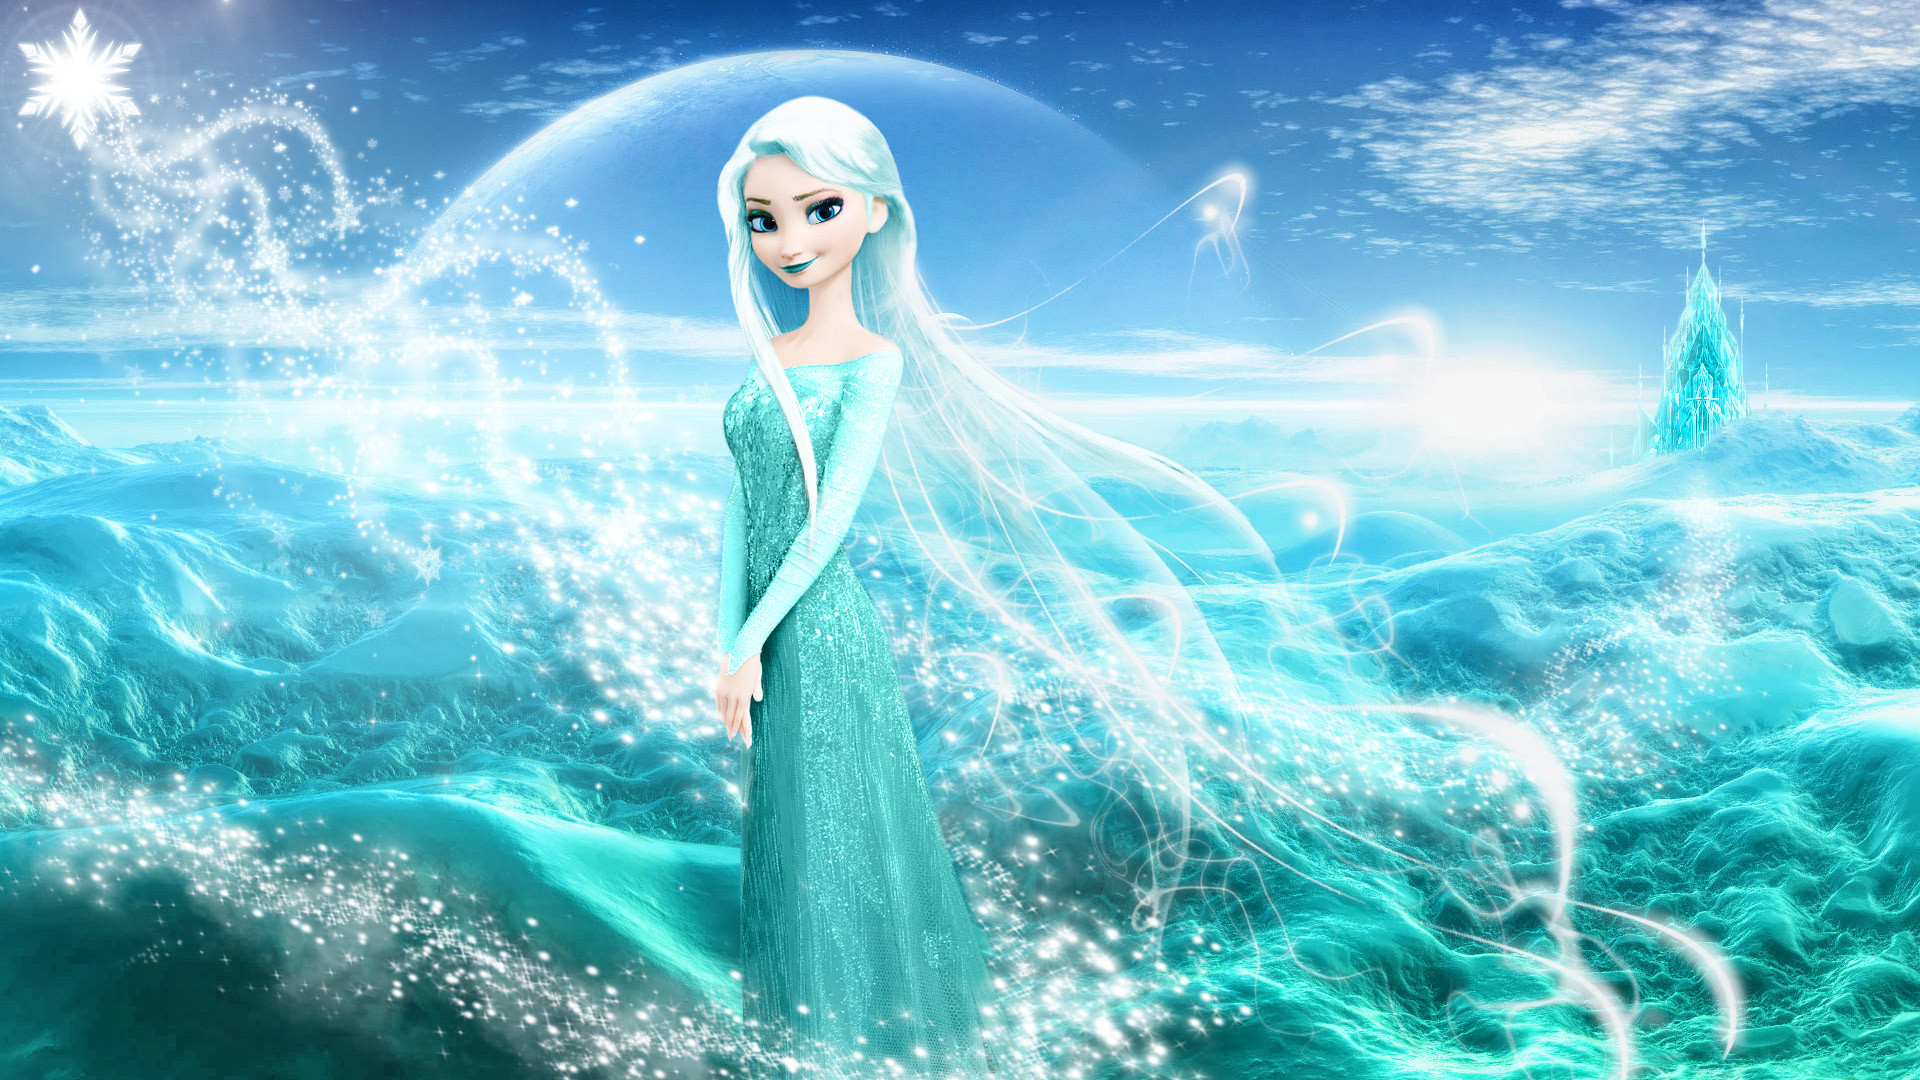 1920x1080 Elsa the Snow Queen images The Snow Queen HD wallpaper and background photos